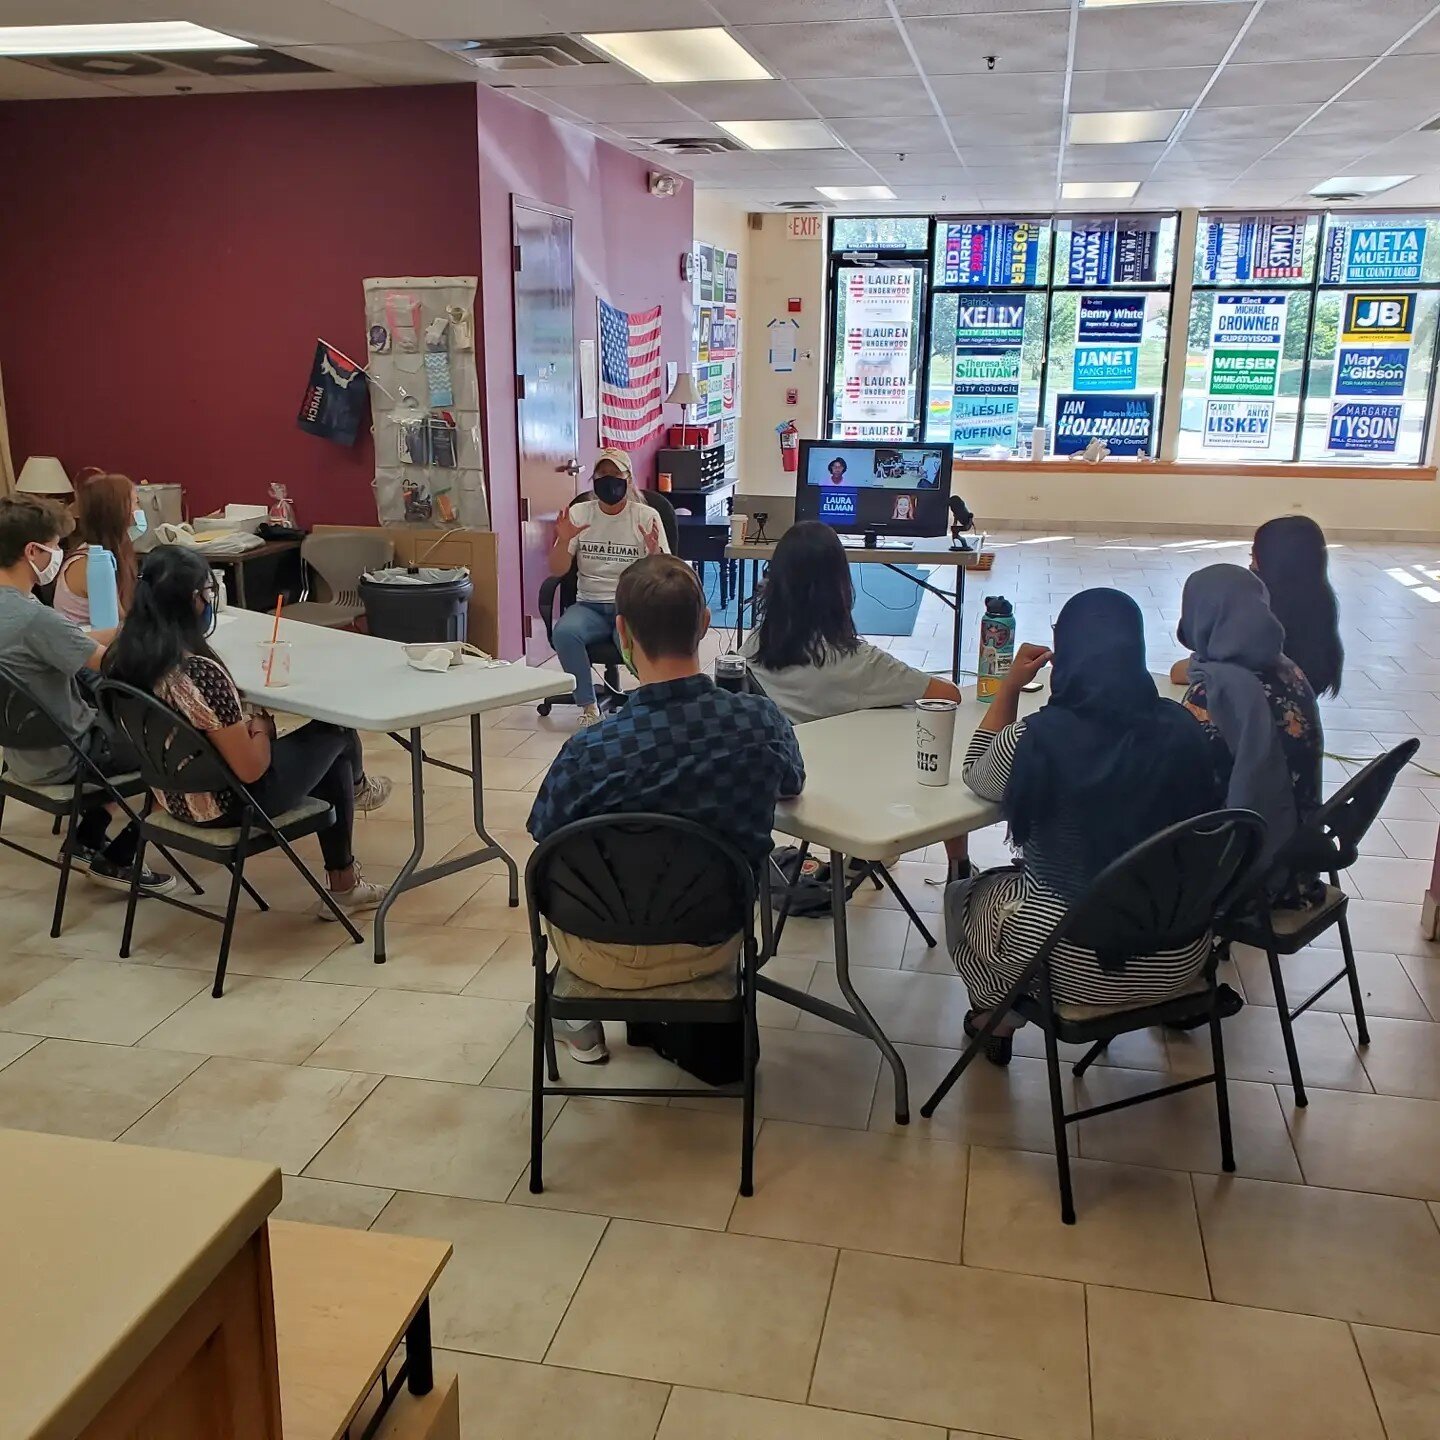 We had a great time at our Campaign Summer Camp wrap-up event last Saturday. Between the emotional goodbyes and the Chipotle (and our Acting Finance Chair Arian almost bursting into tears) it was great to hear from Senator Laura Ellman and Congresswo